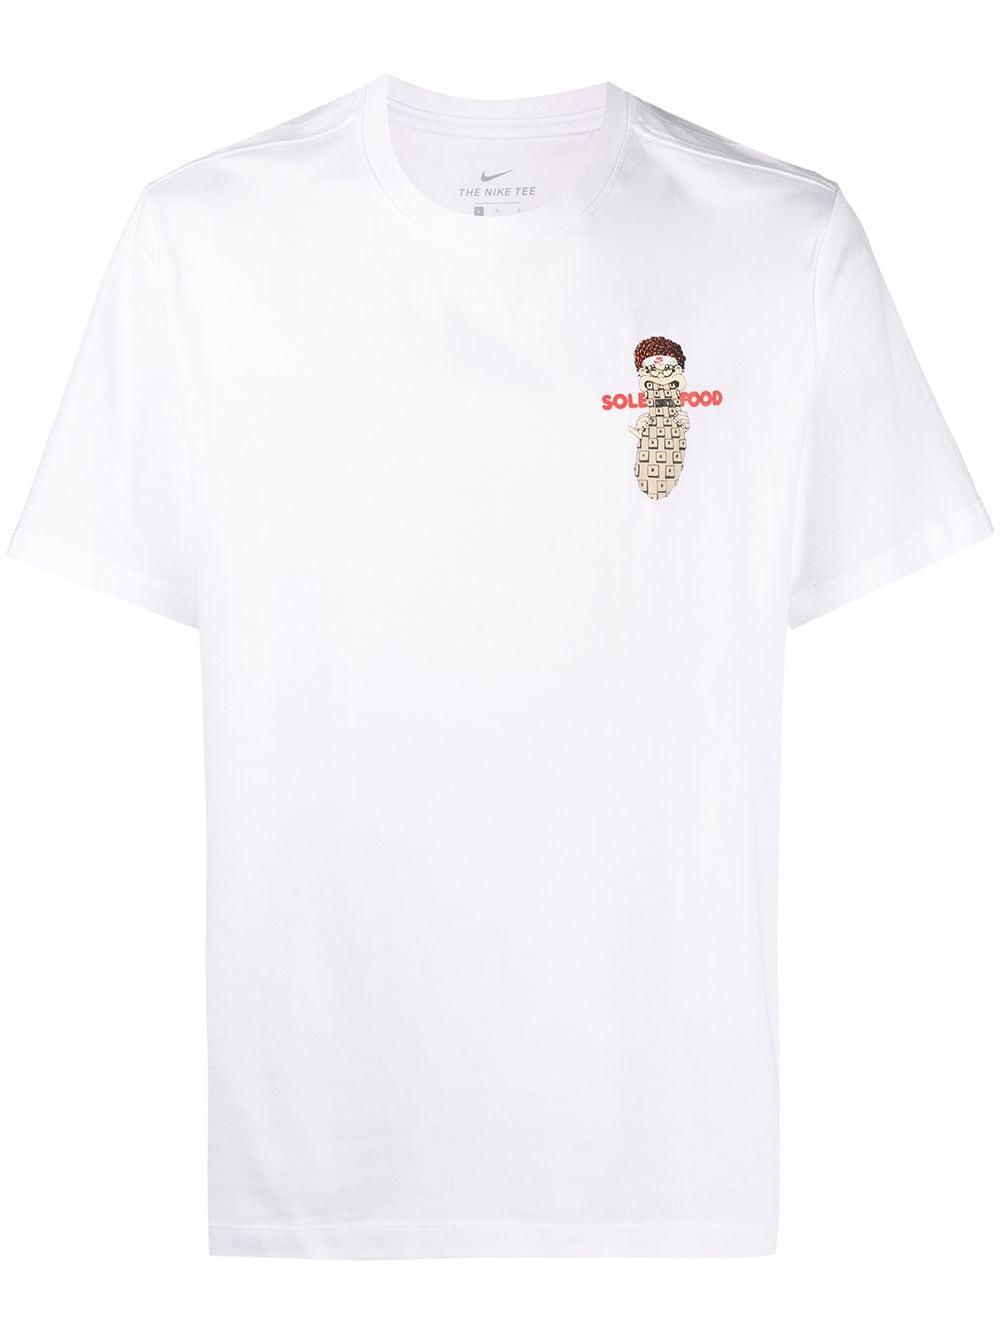 Nike Cotton Sole Food Graphic Print T-shirt in White for Men | Lyst